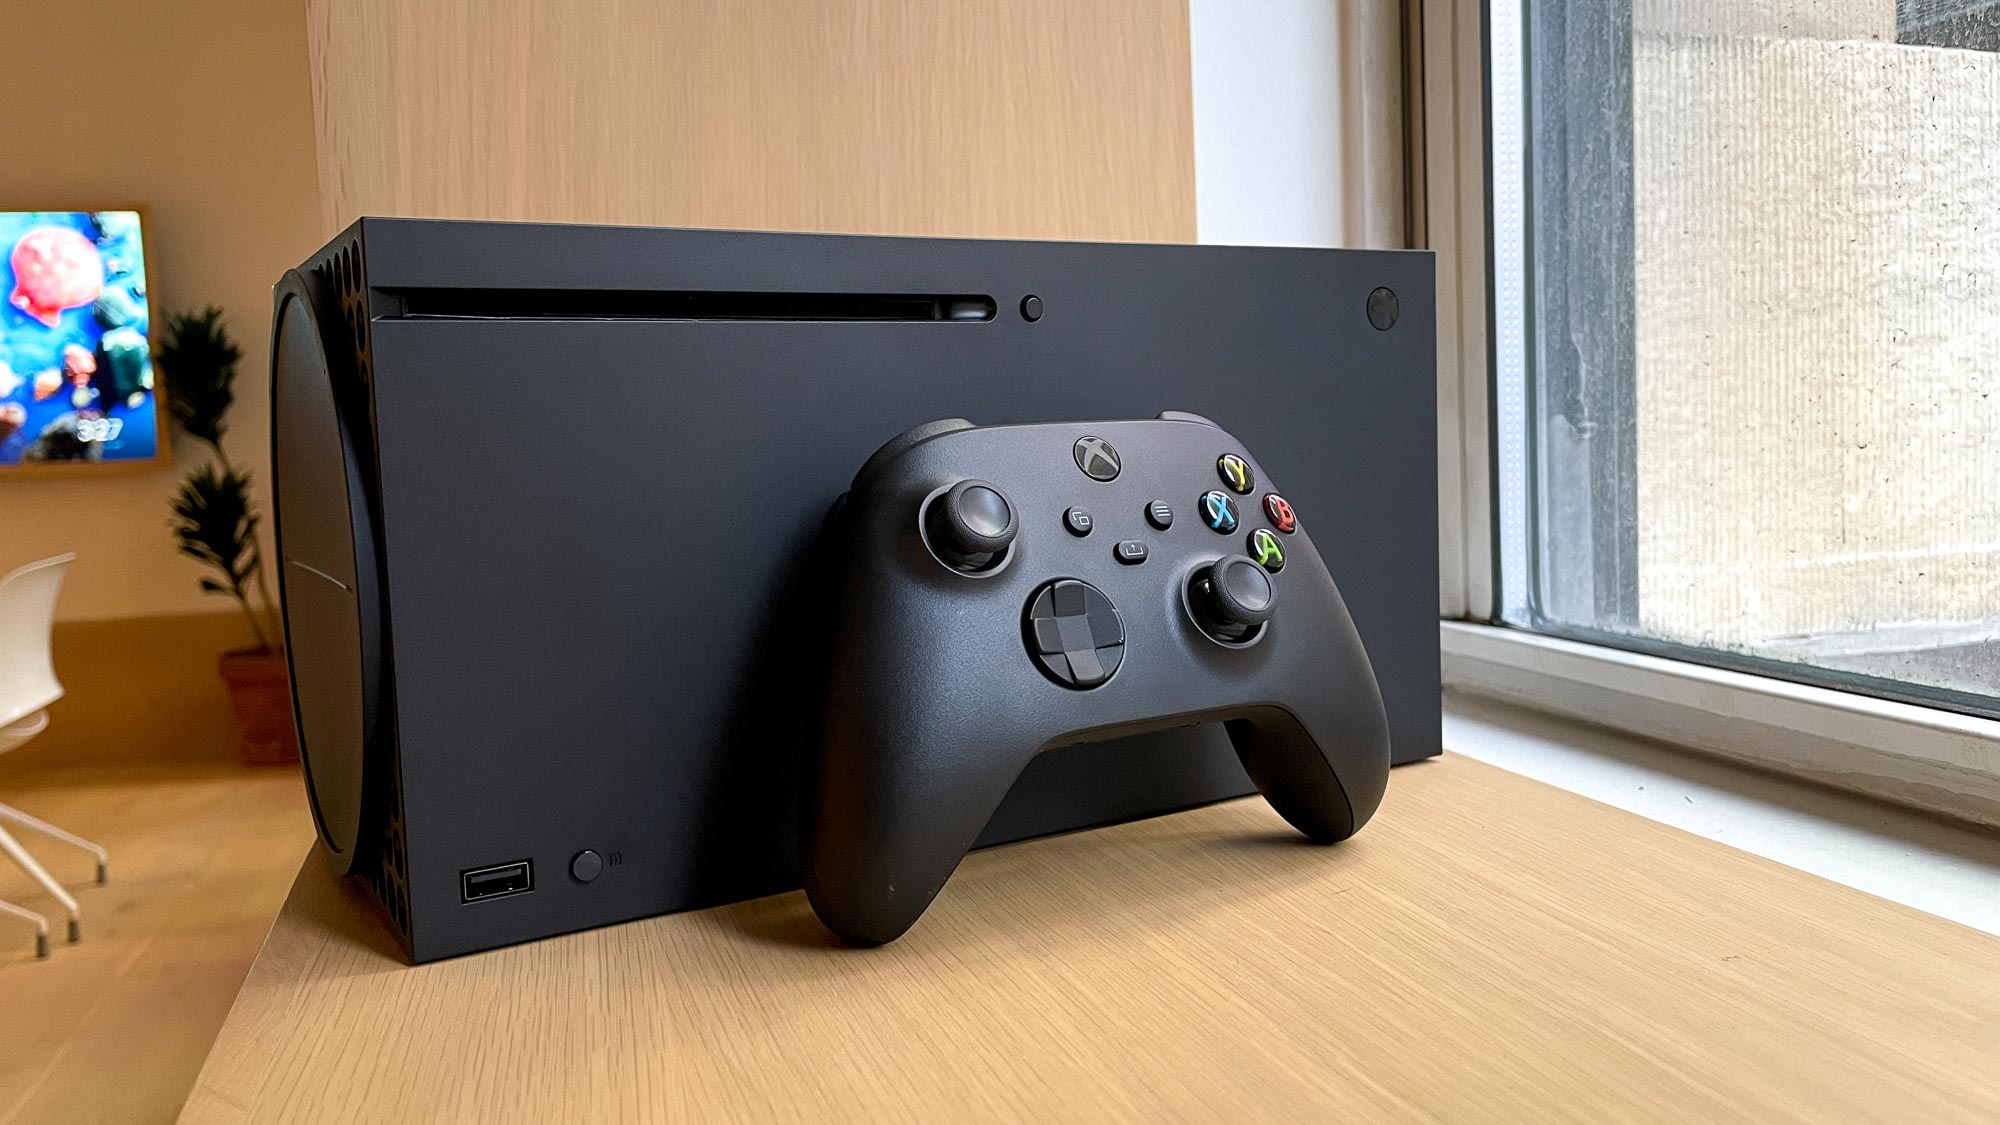 GamerCityNews oogbYeCEqwRew5VoBjqSkg Xbox streaming device could start to make consoles redundant — here’s why 